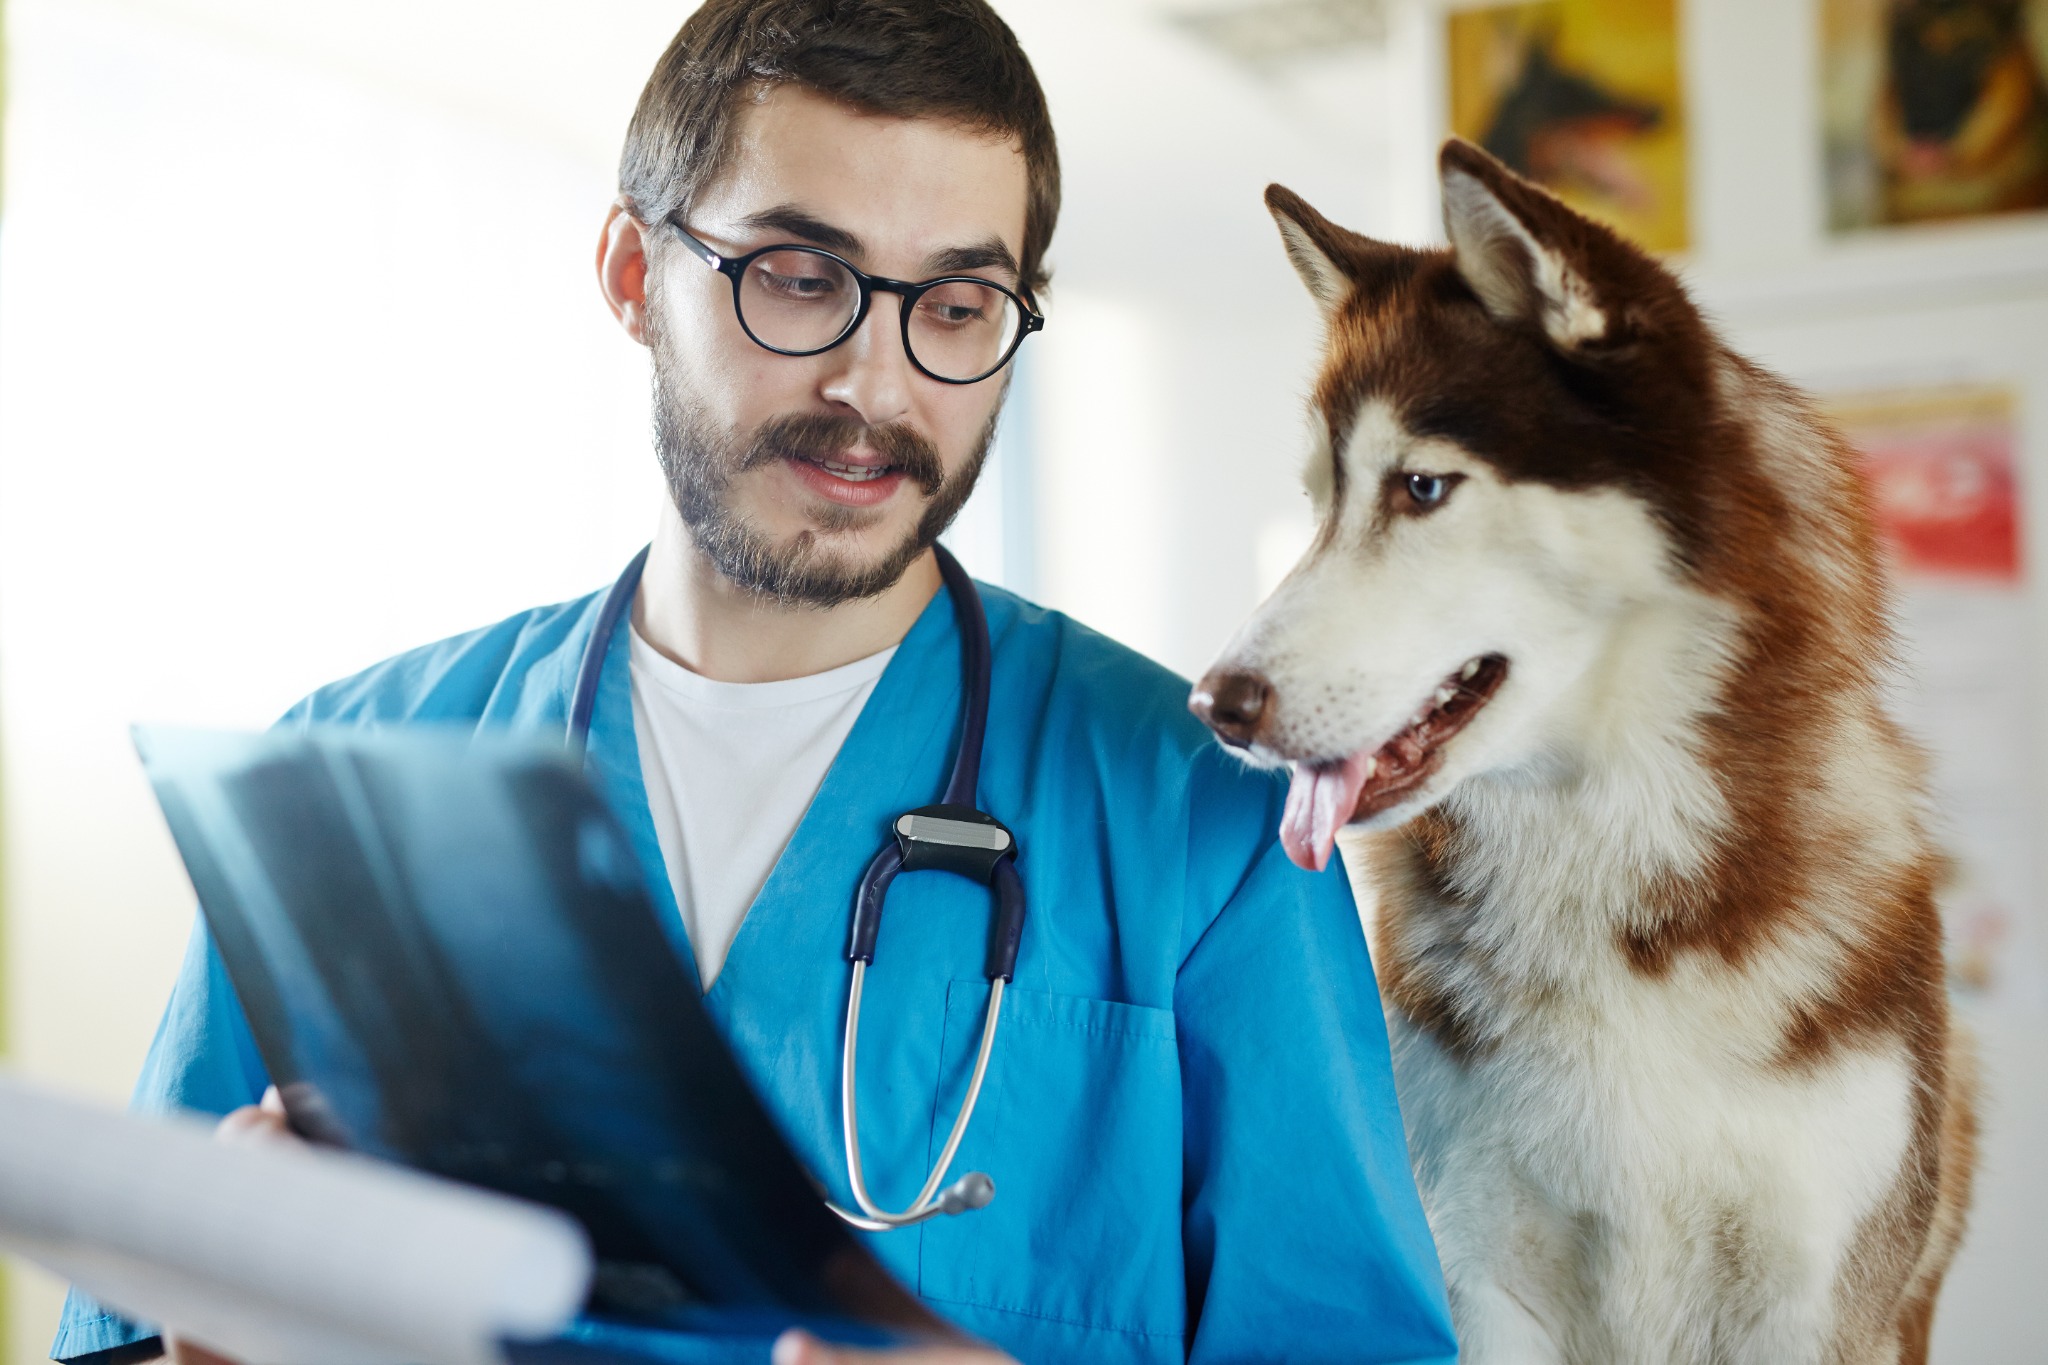 Managing the Asymmetrical Relationships in Your Veterinary Practice